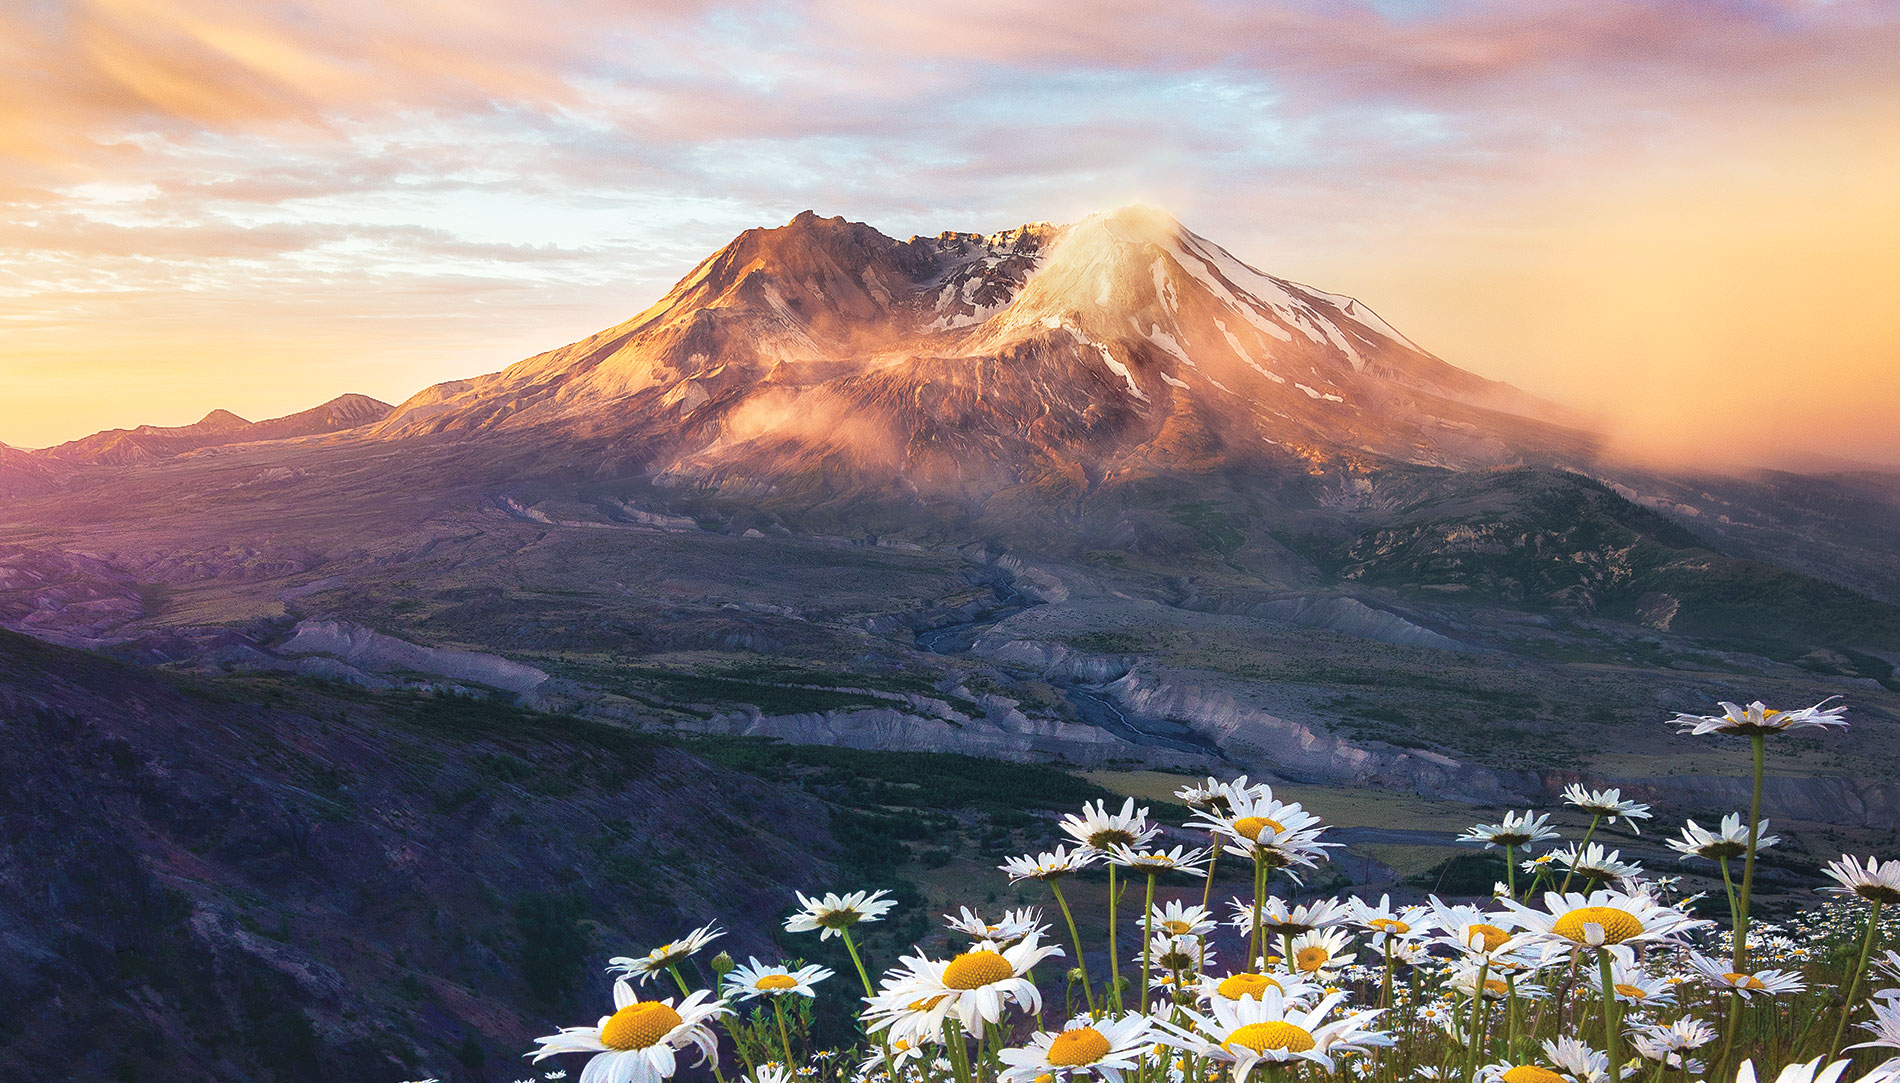 Daisies bloom as Mount St. Helens looms in the background